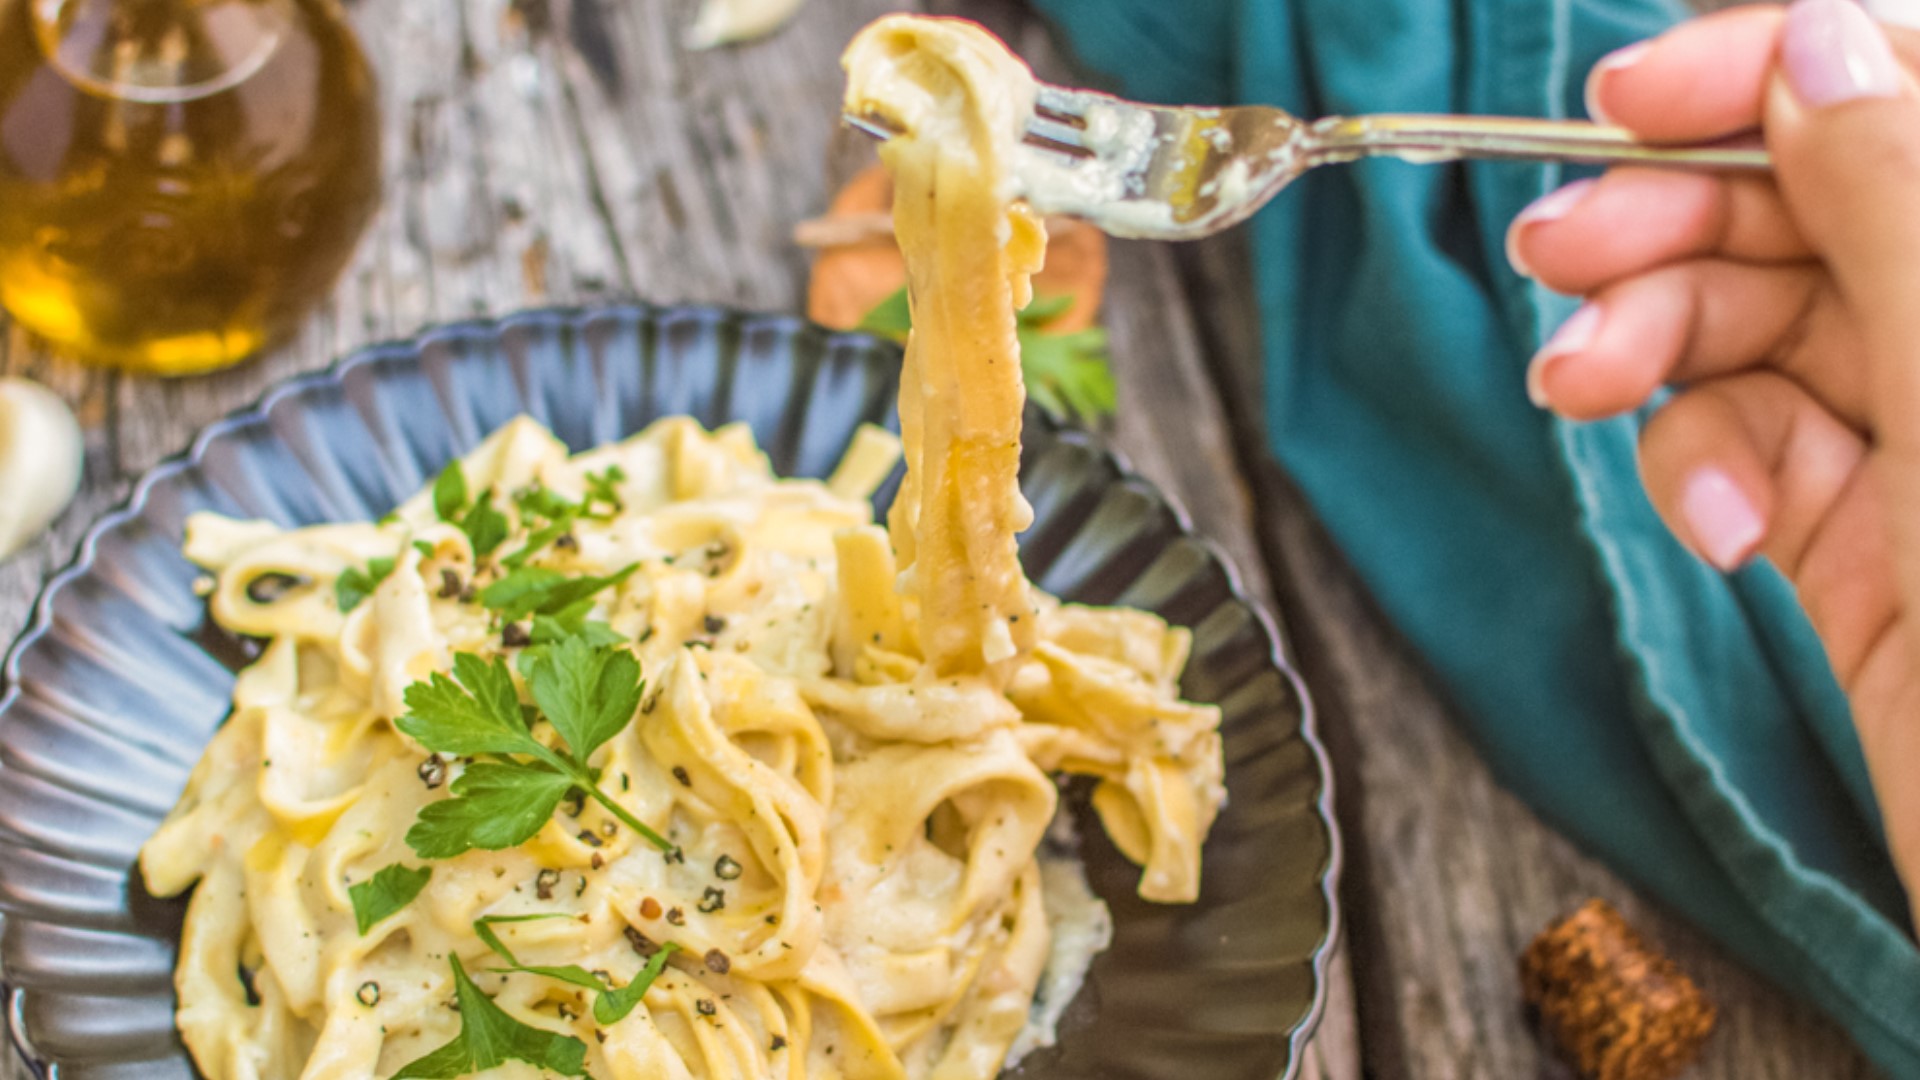 In their debut book, Toni Okamoto and Michelle Cehn teamed up to share 100 vegan recipes packed with flavor. Megan Evans samples fettuccine alfredo!